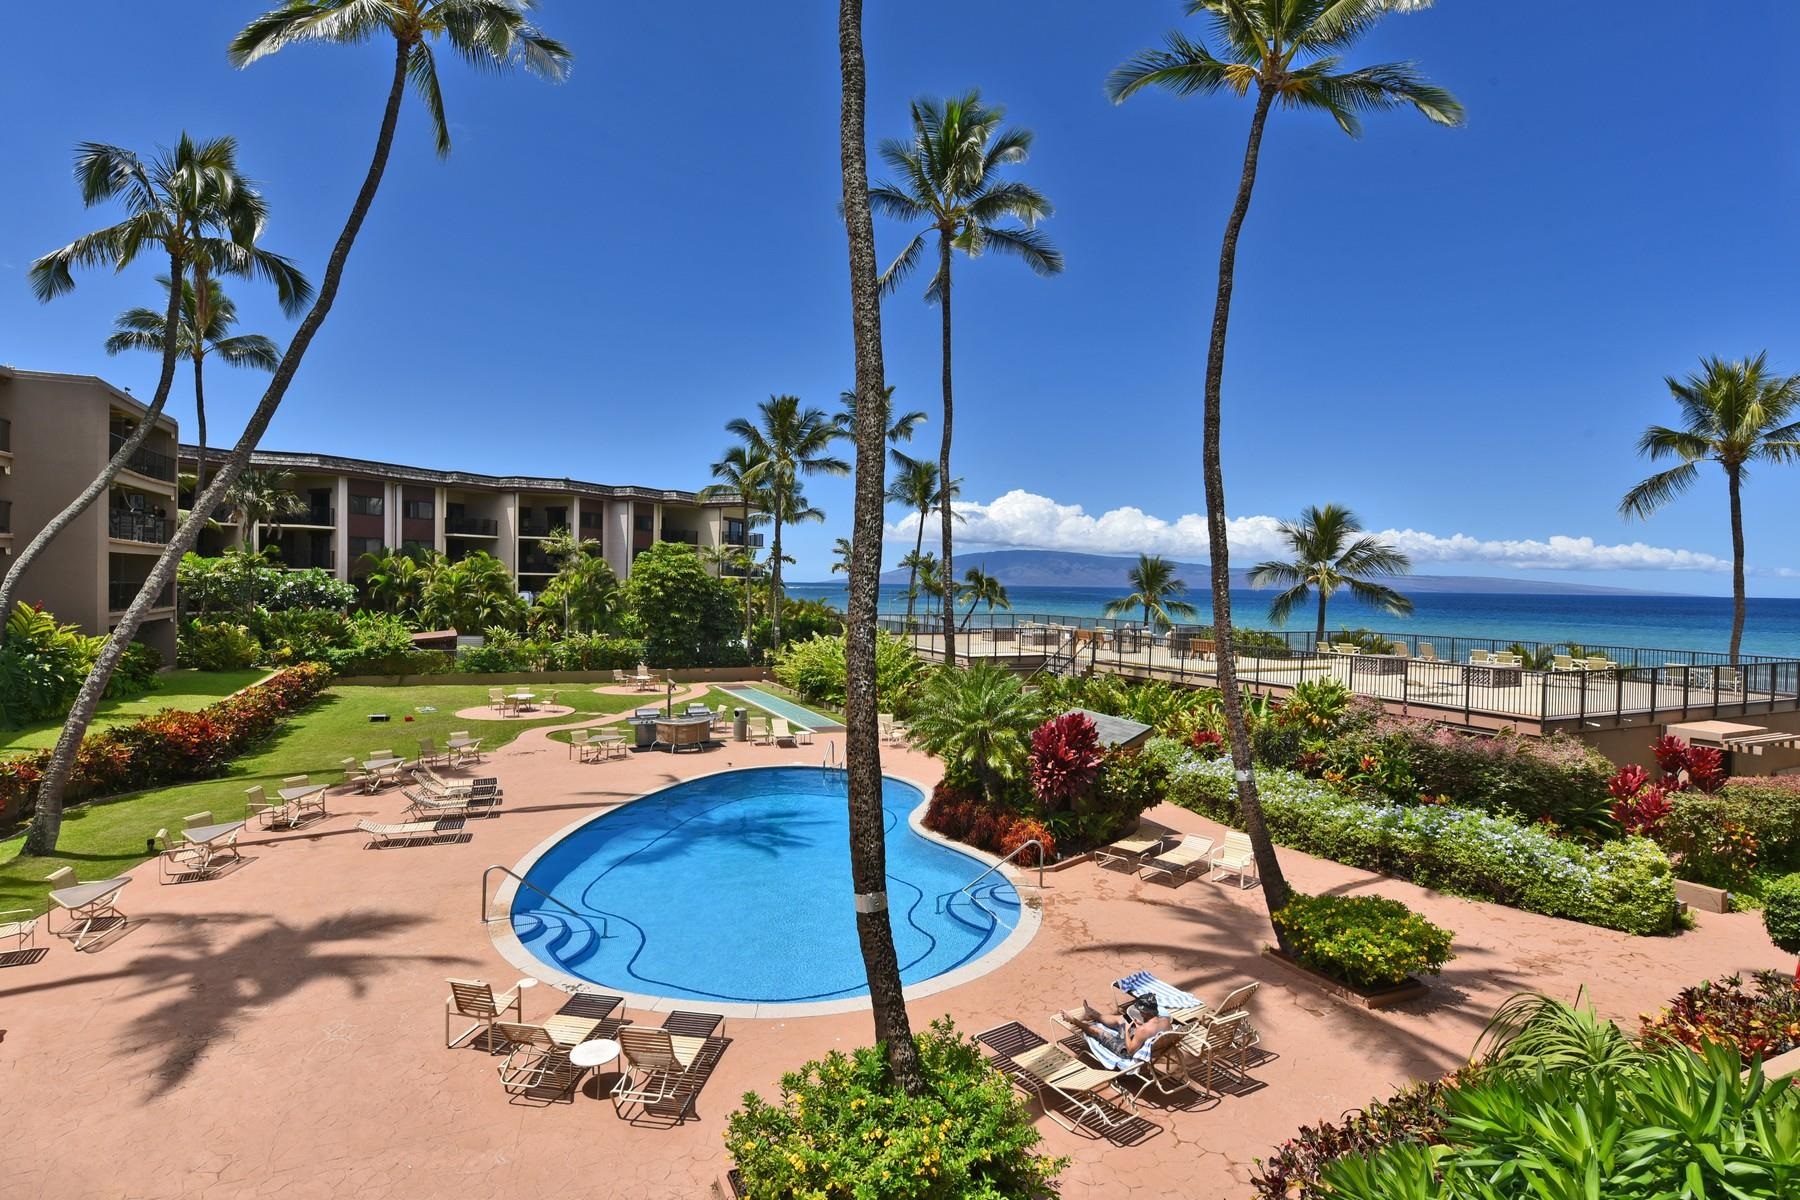 MauiRealEstate.Net: Comparable Sold